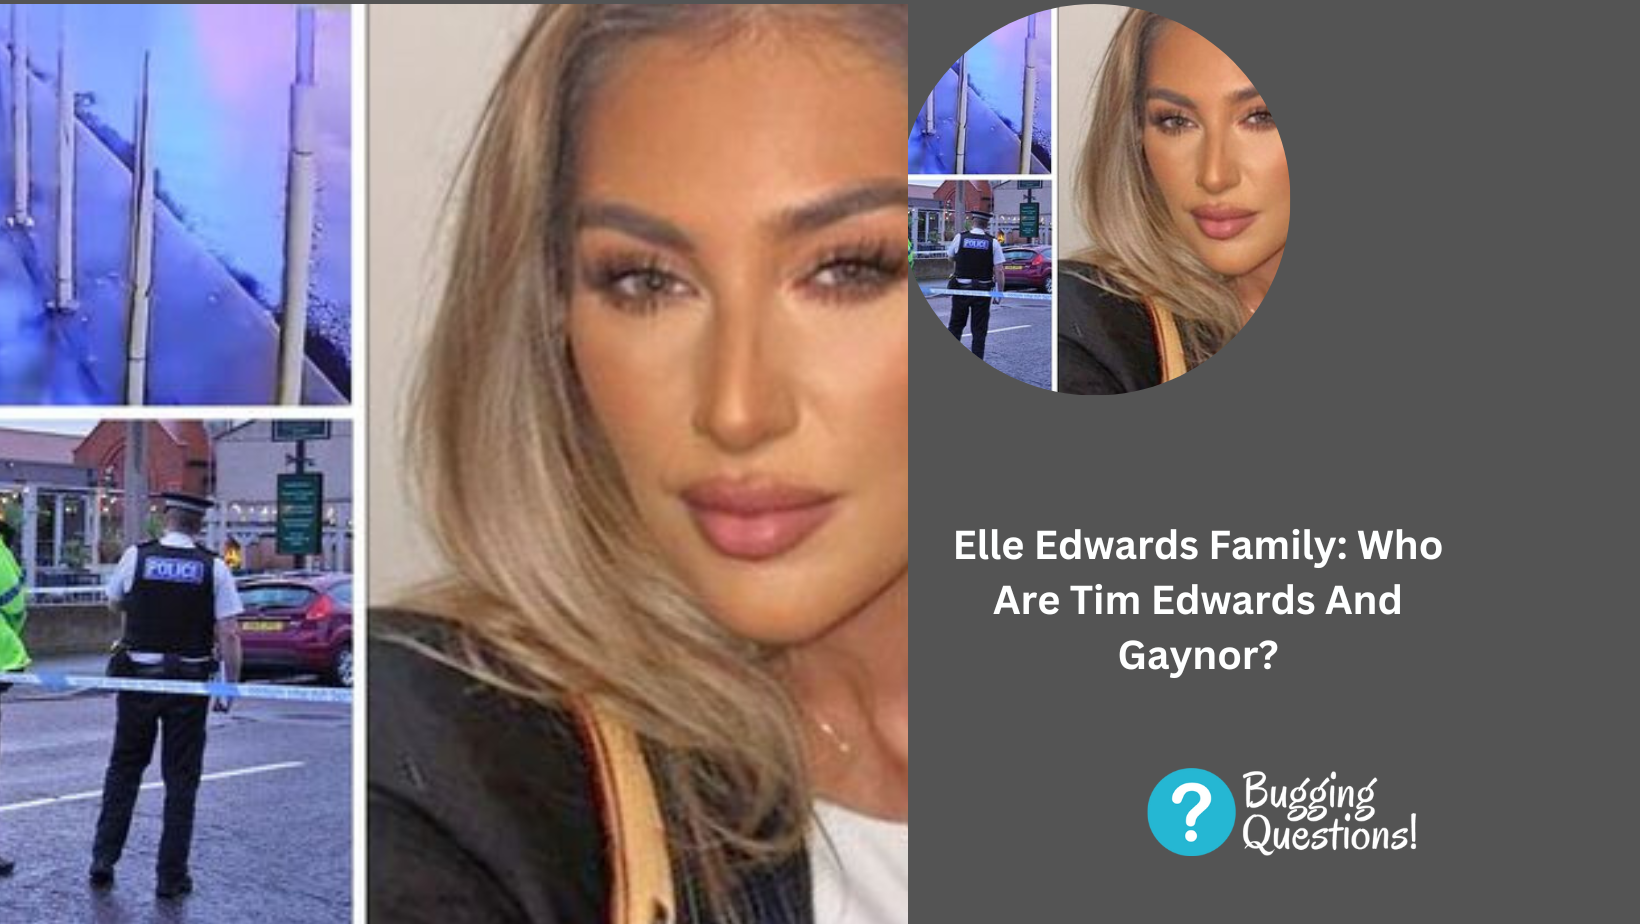 Elle Edwards Family: Who Are Tim Edwards And Gaynor?